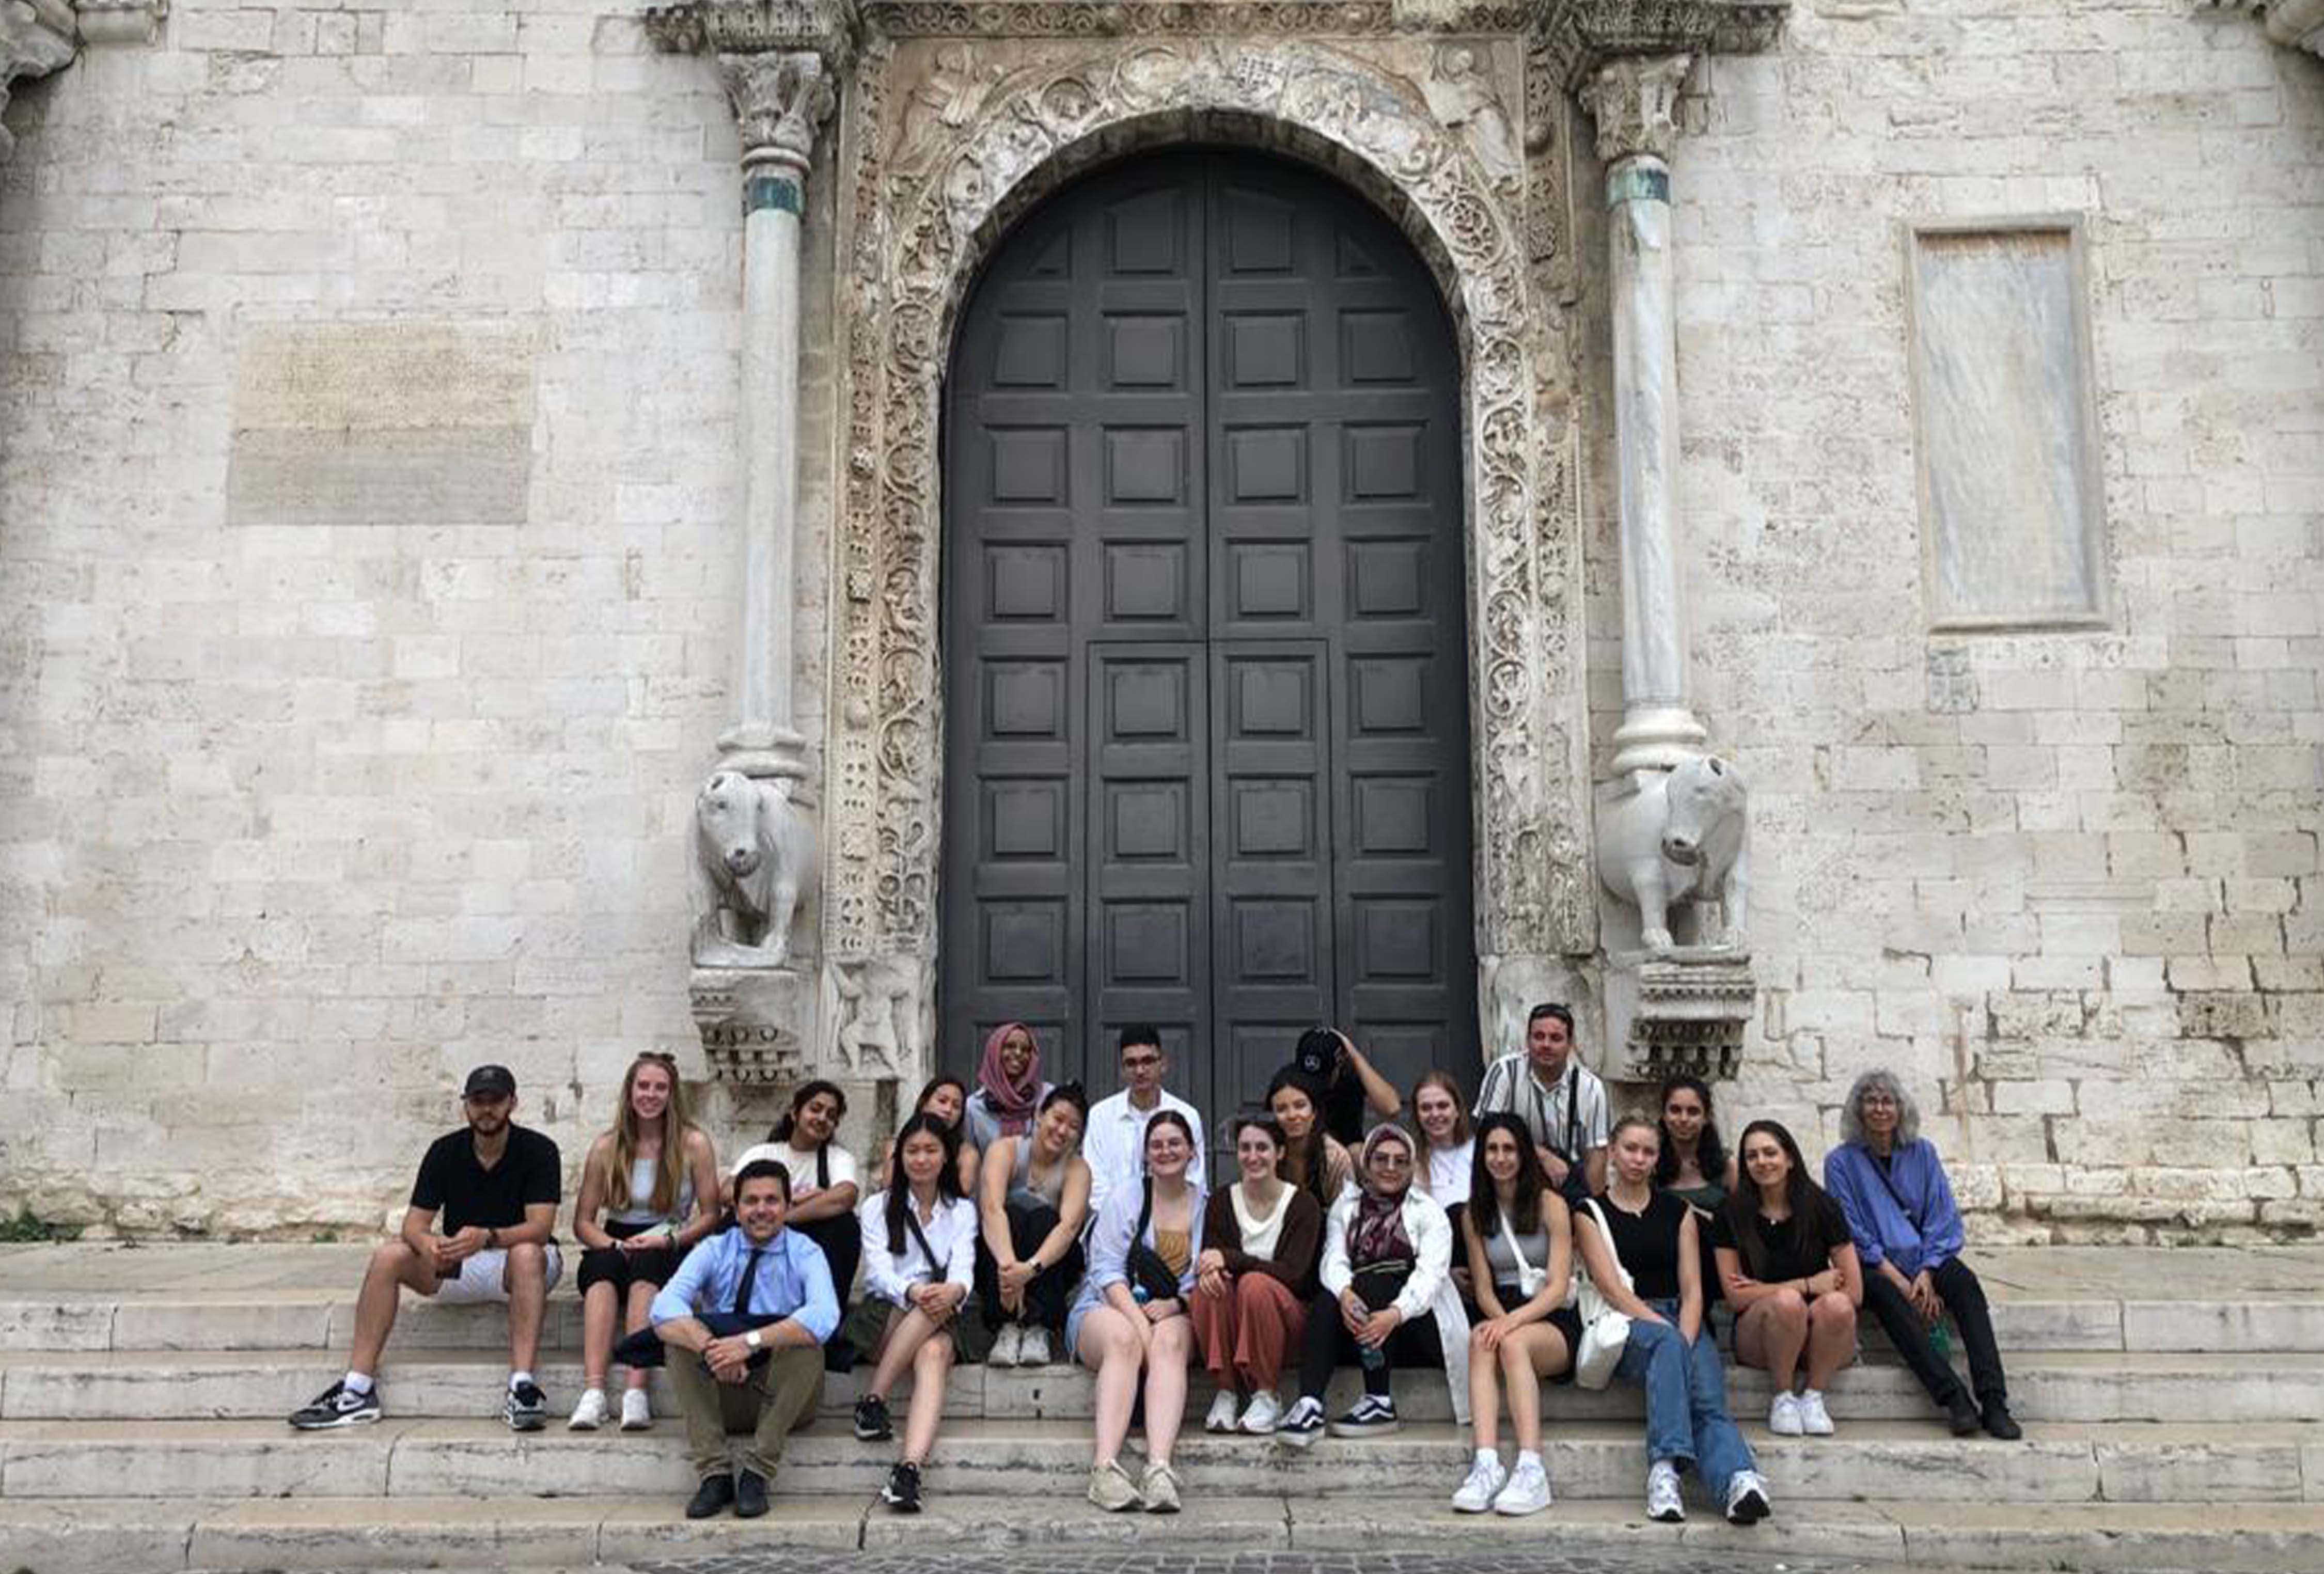 Students sitting on steps in Bari, Italy